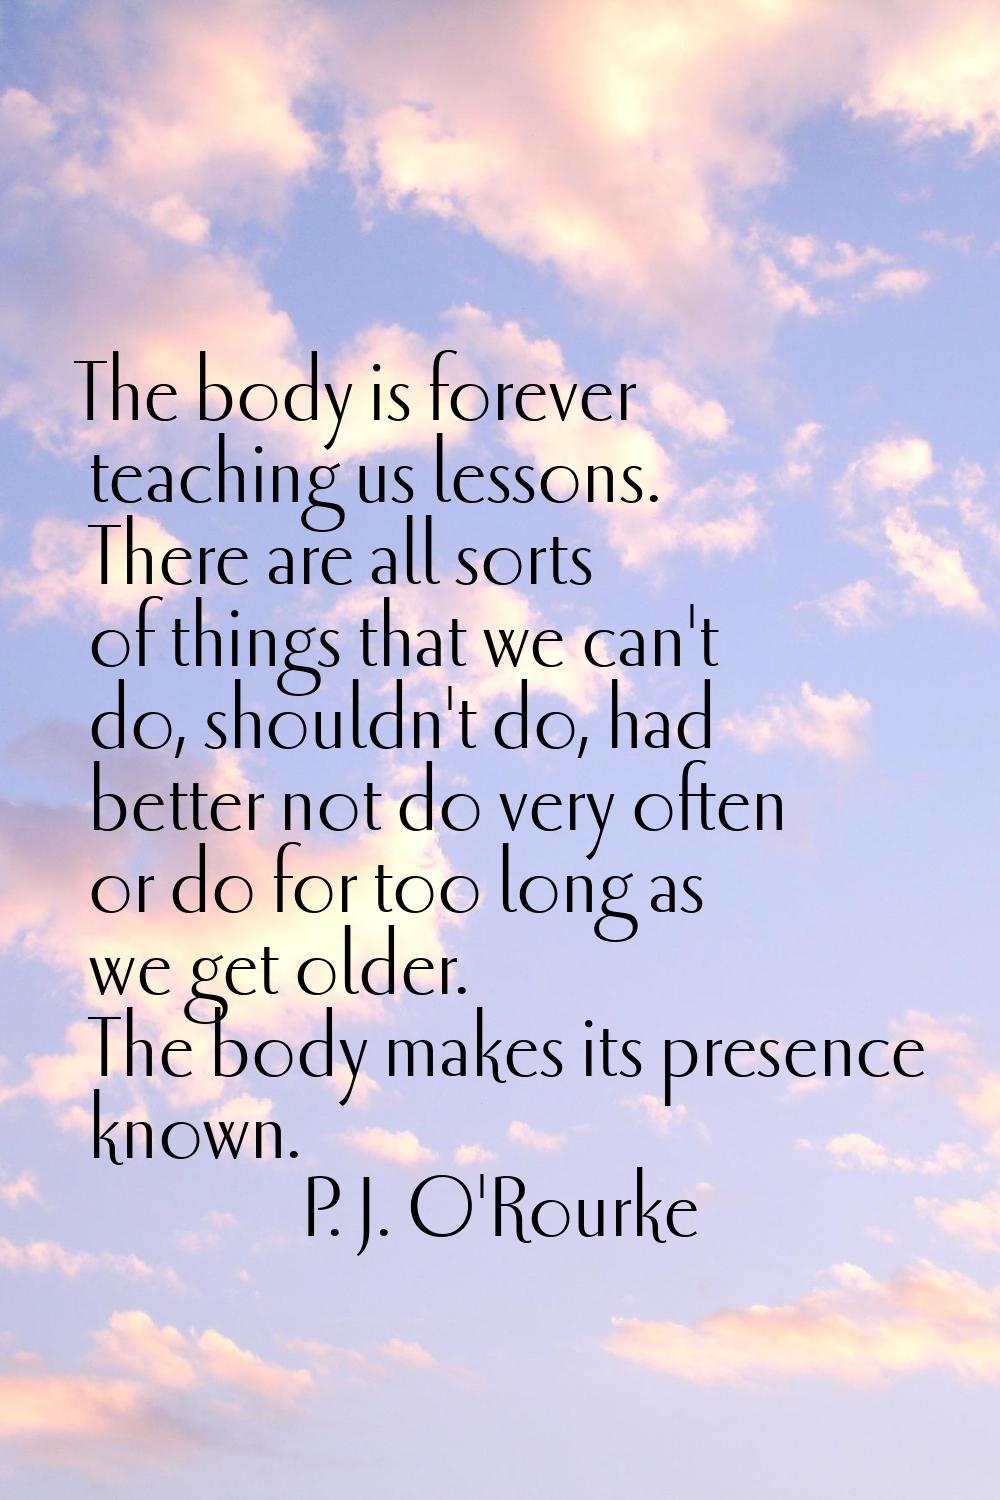 The body is forever teaching us lessons. There are all sorts of things that we can't do, shouldn't 